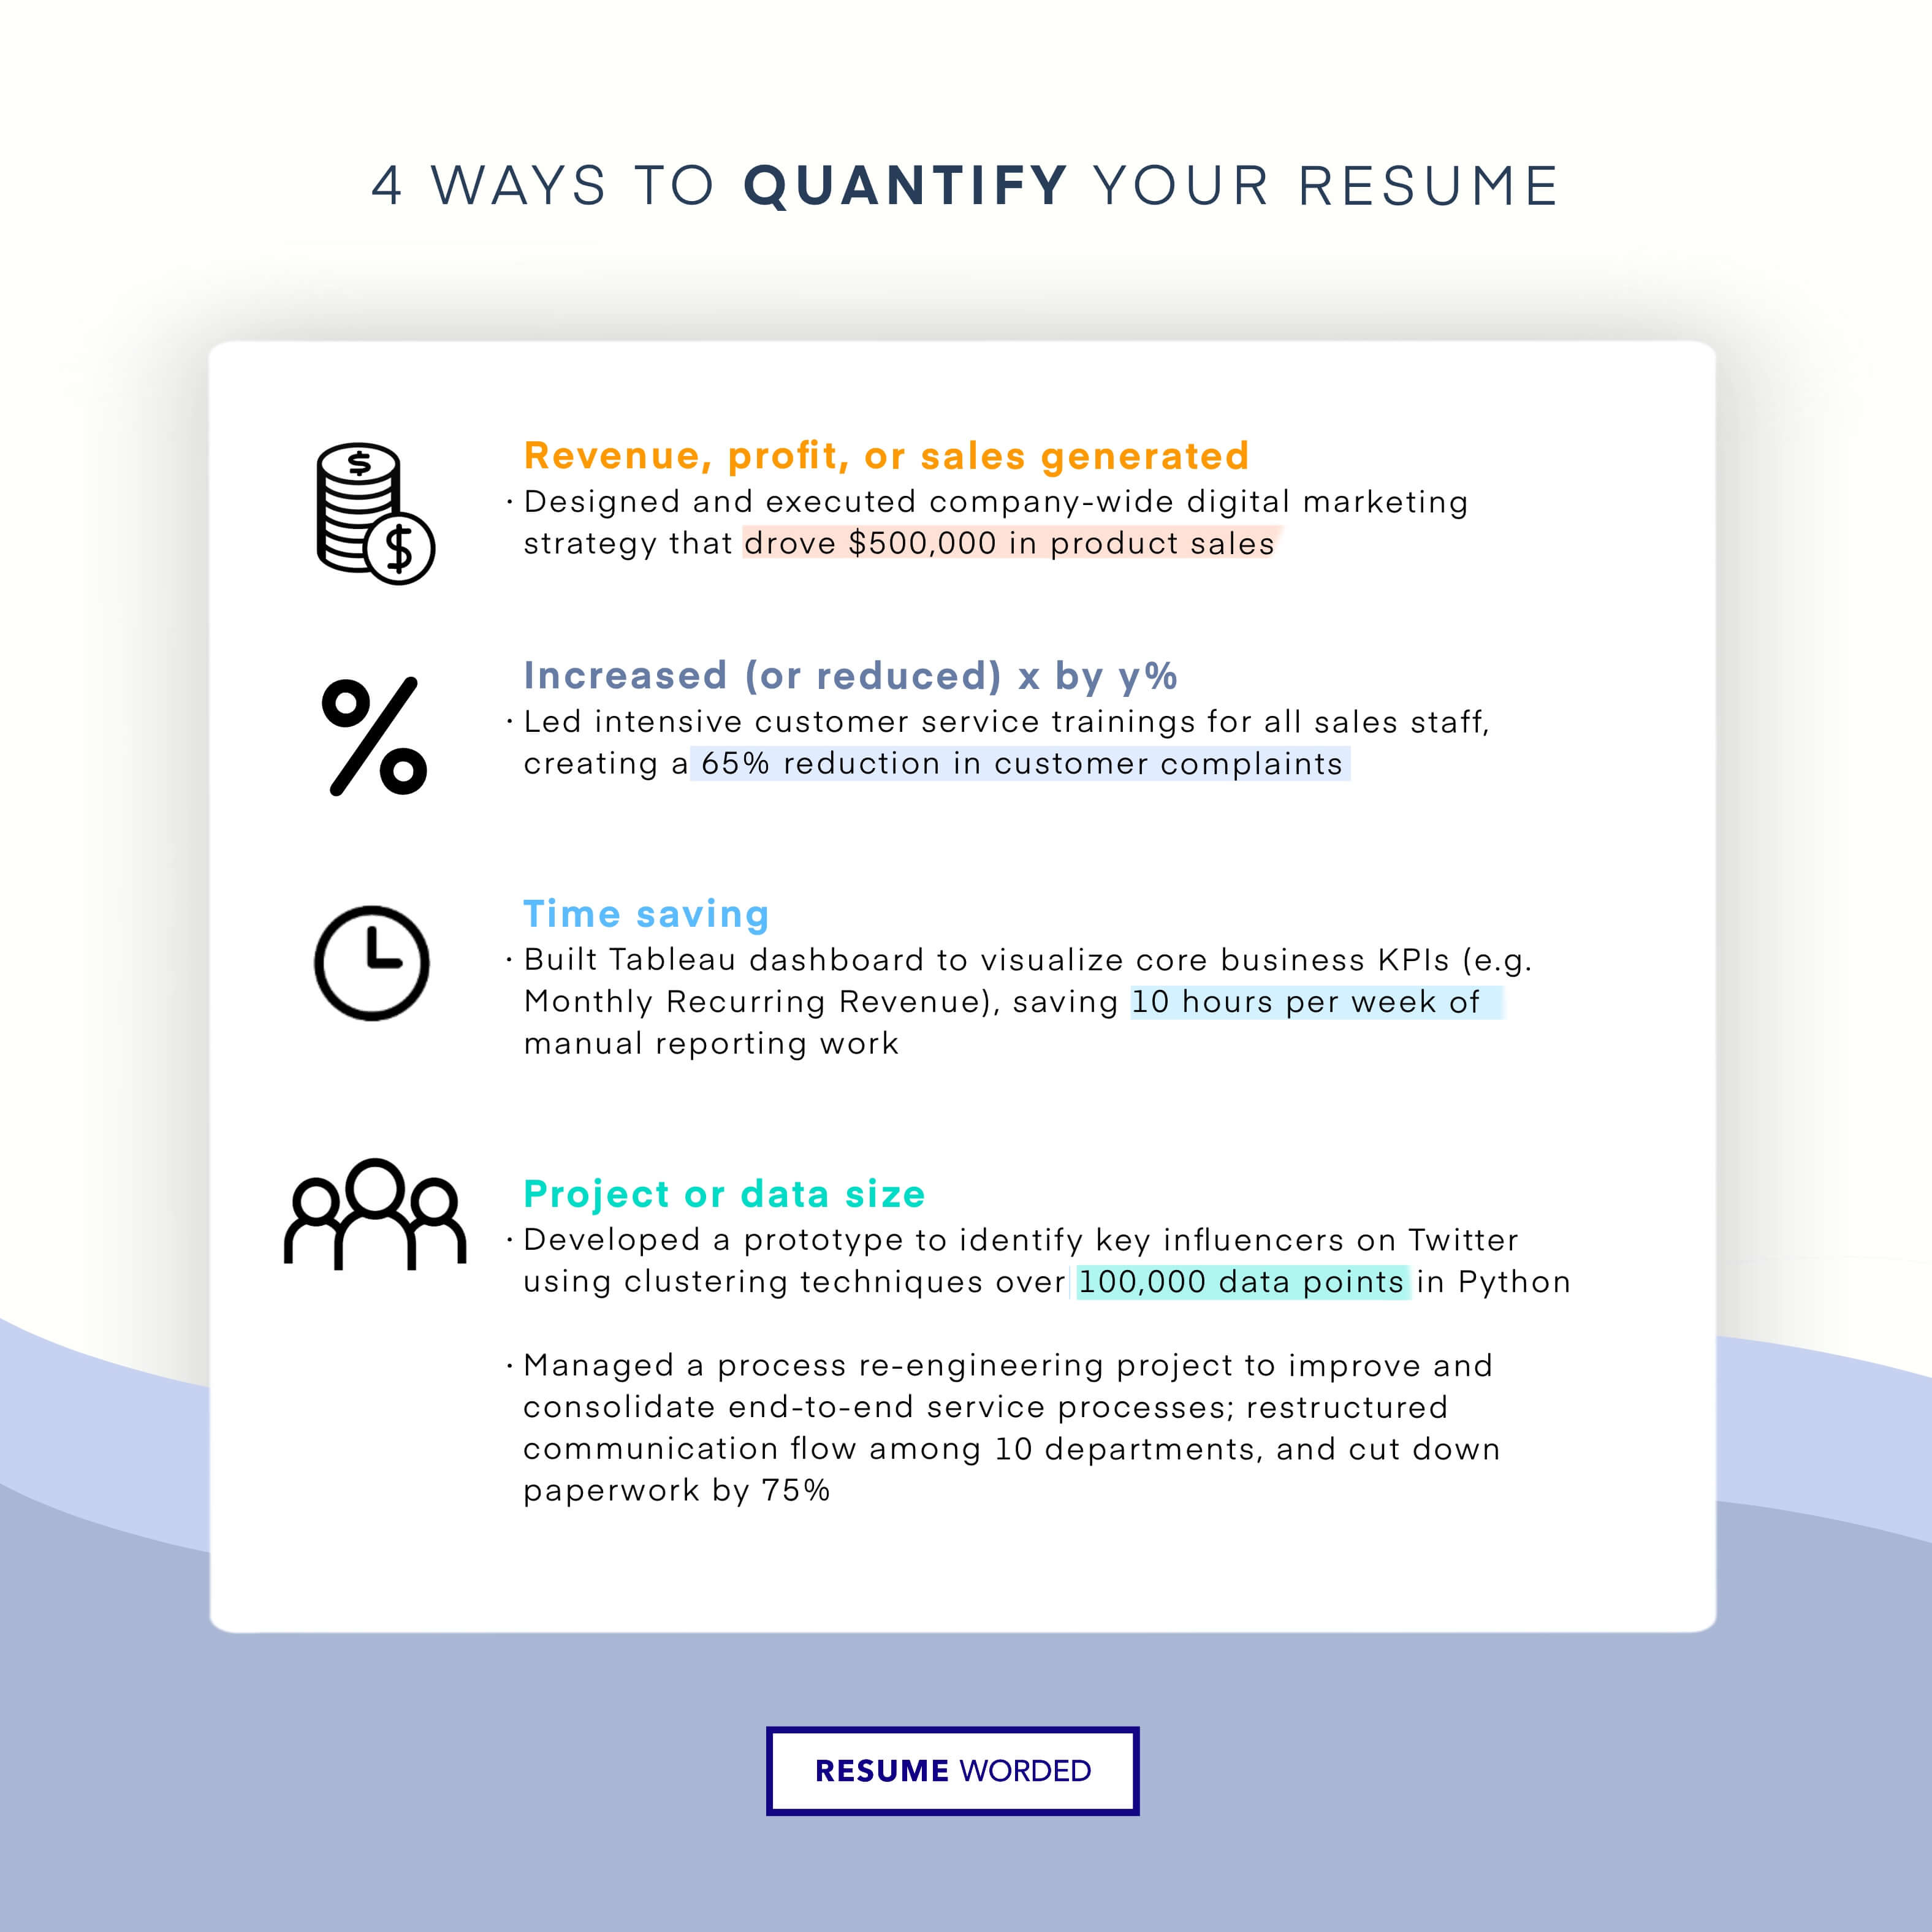 Quantify increased efficiency due to your work. - Supply Chain Planner Resume